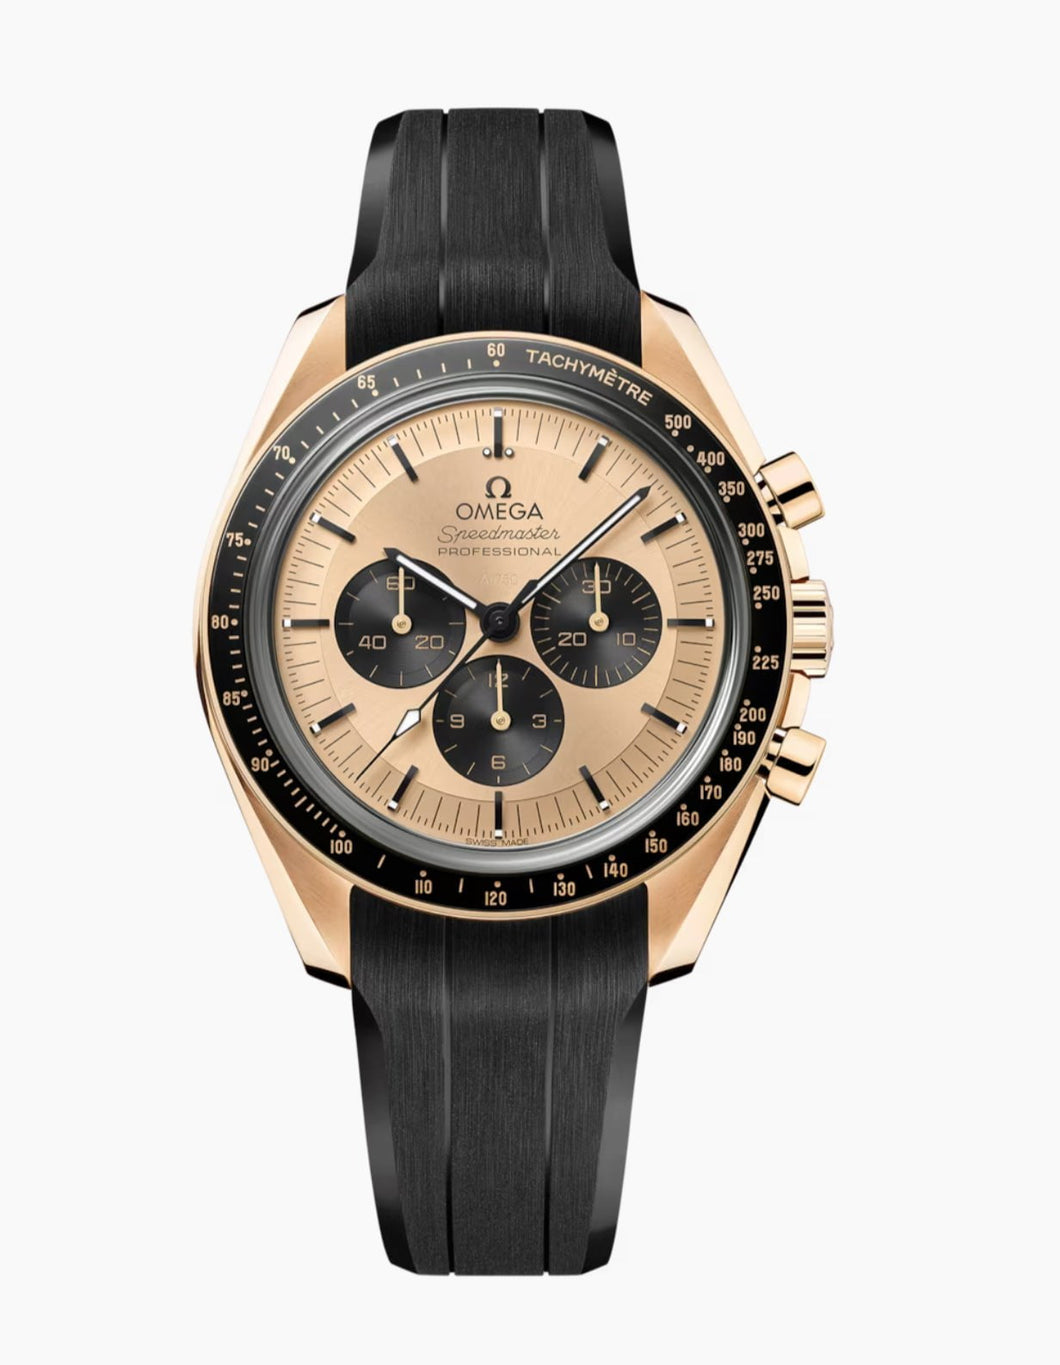 OMEGA SPEEDMASTER MOONWATCH PROFESSIONAL
CO‑AXIAL MASTER CHRONOMETER CHRONOGRAPH 42 MM 310.62.42.50.99.001